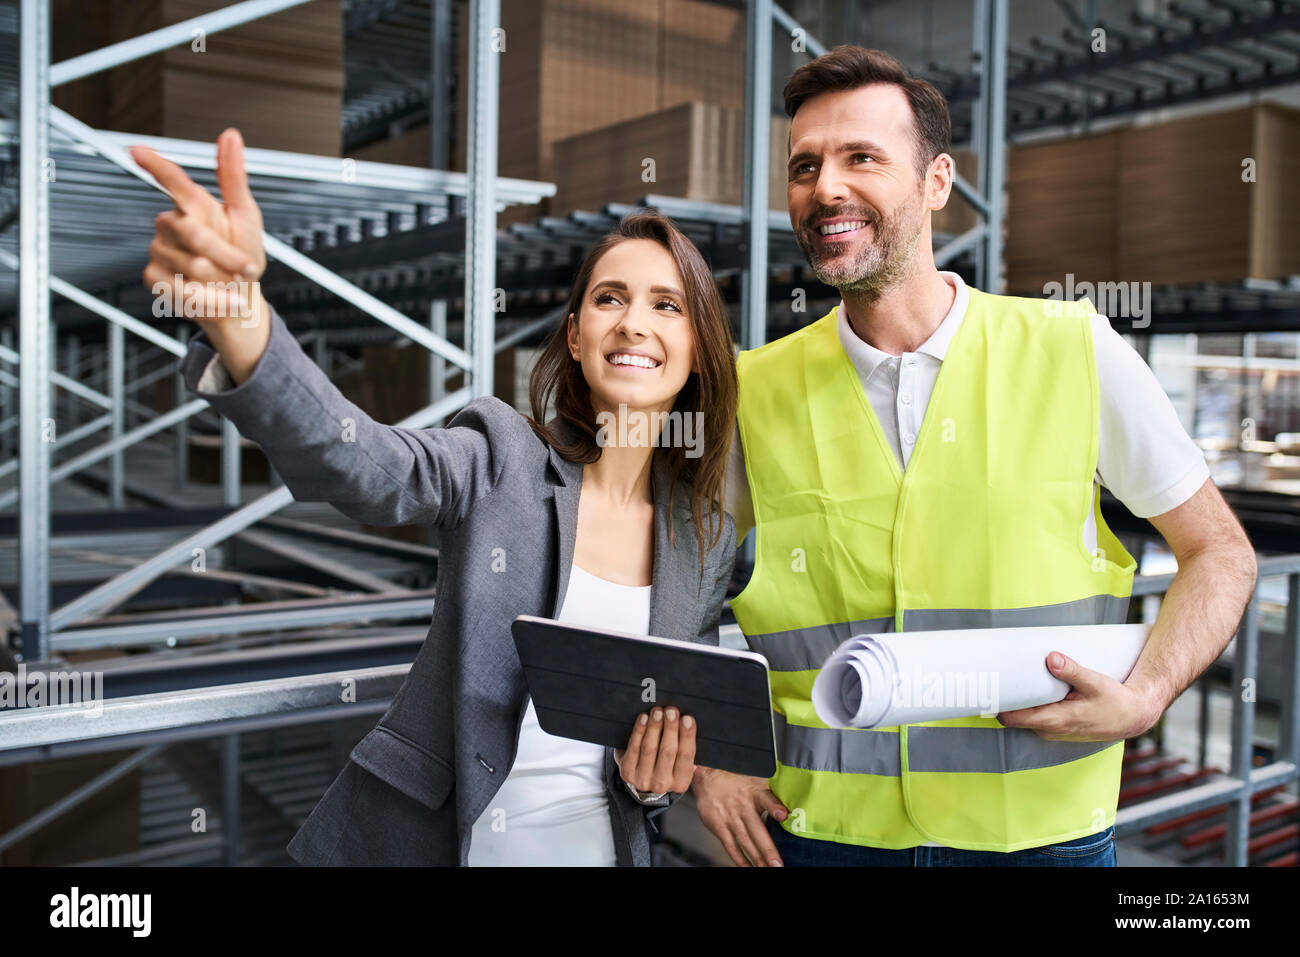 Smiling businesswoman talking to man in reflective vest in a factory Stock Photo